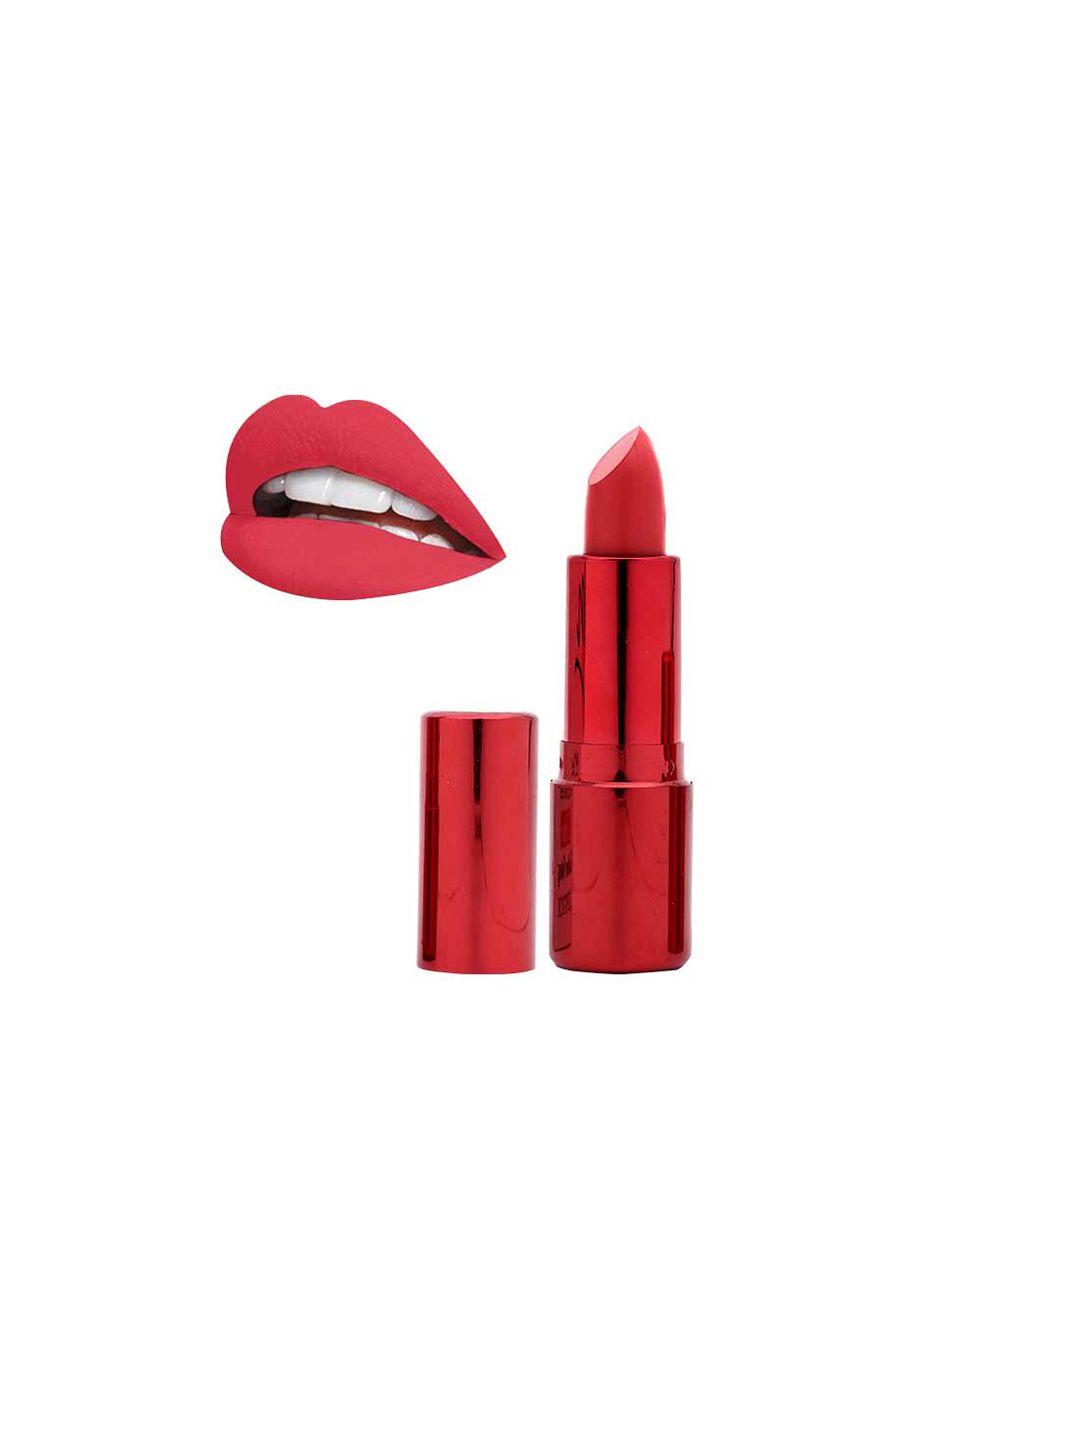 beautyrelay london 12 hour color stay lipstick with vitamin c 3.5g - red love